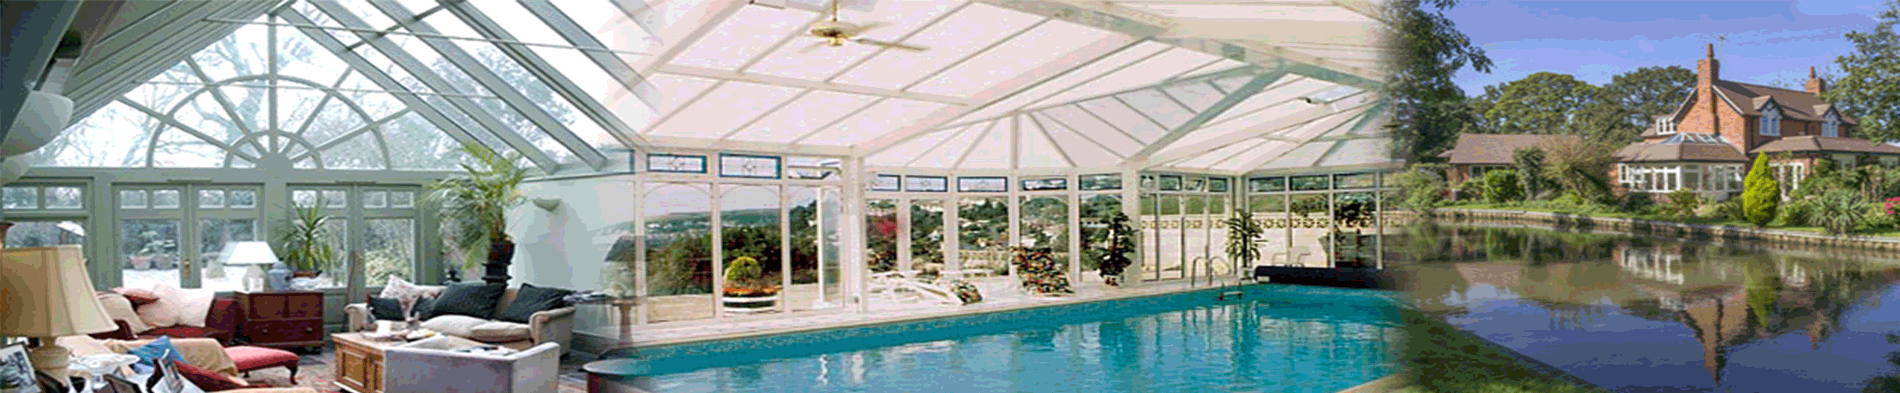 Lean-to Conservatories in High Wycombe